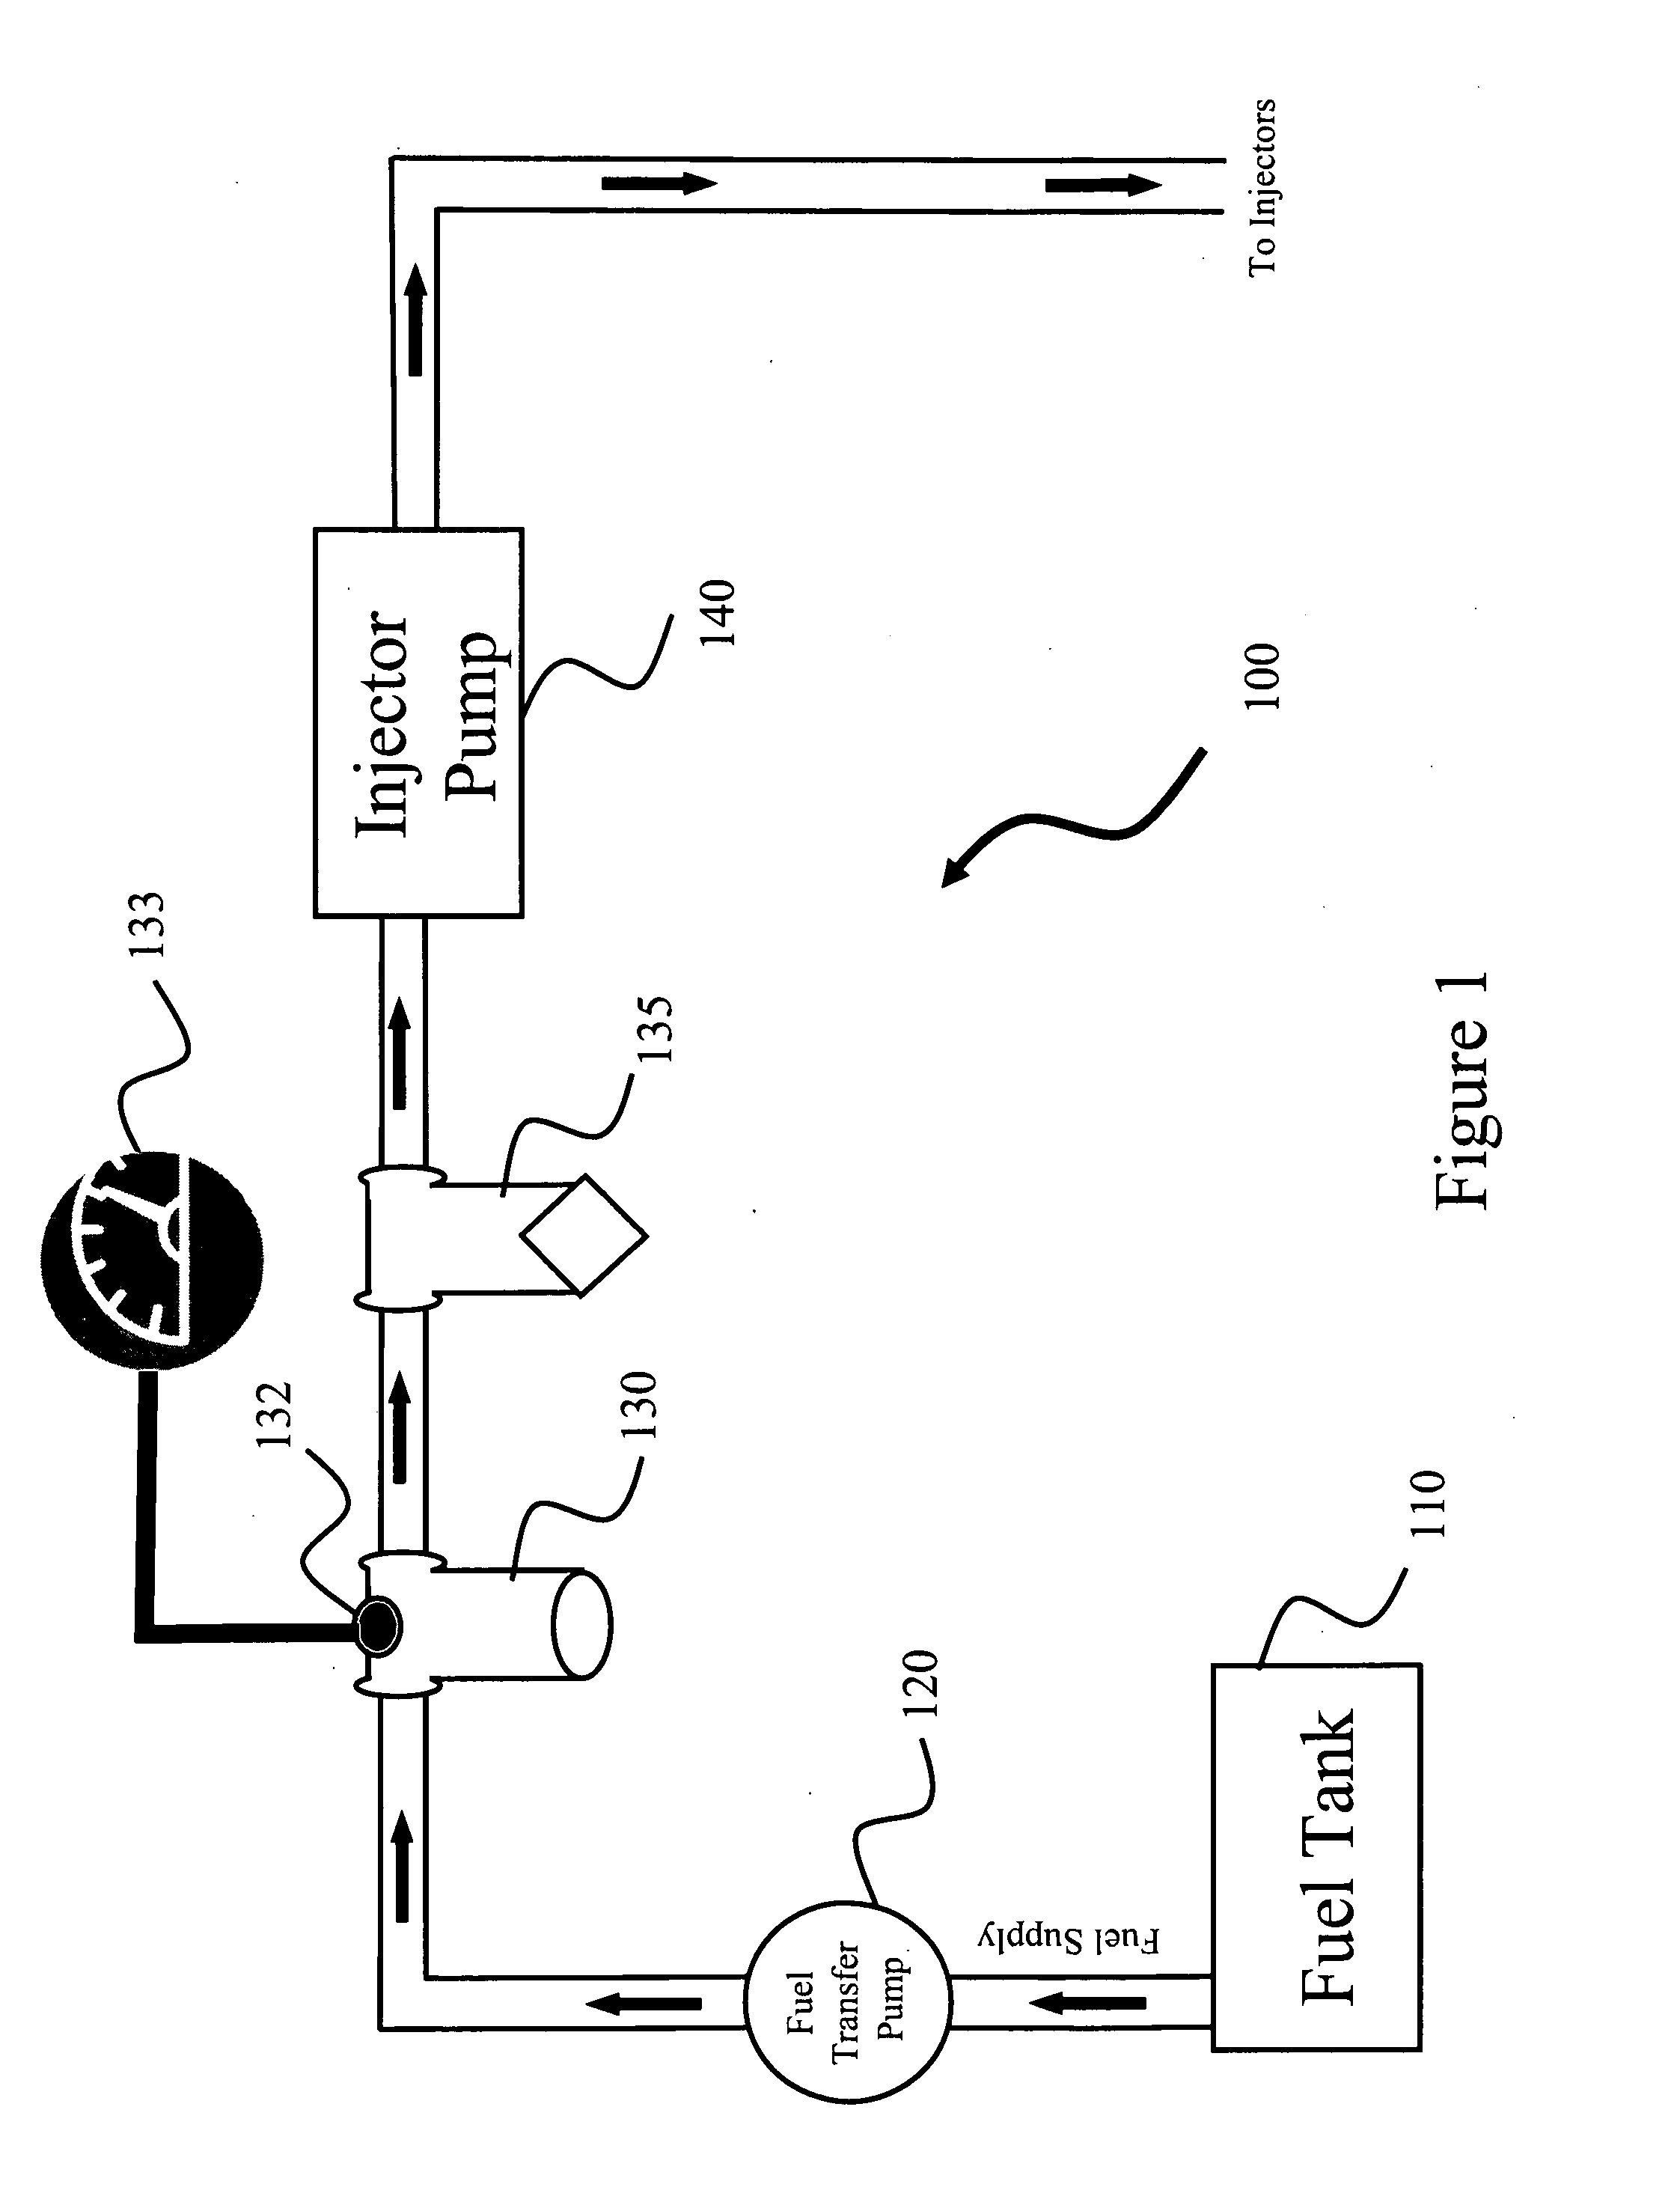 Fuel filter assembly with pressure sending unit